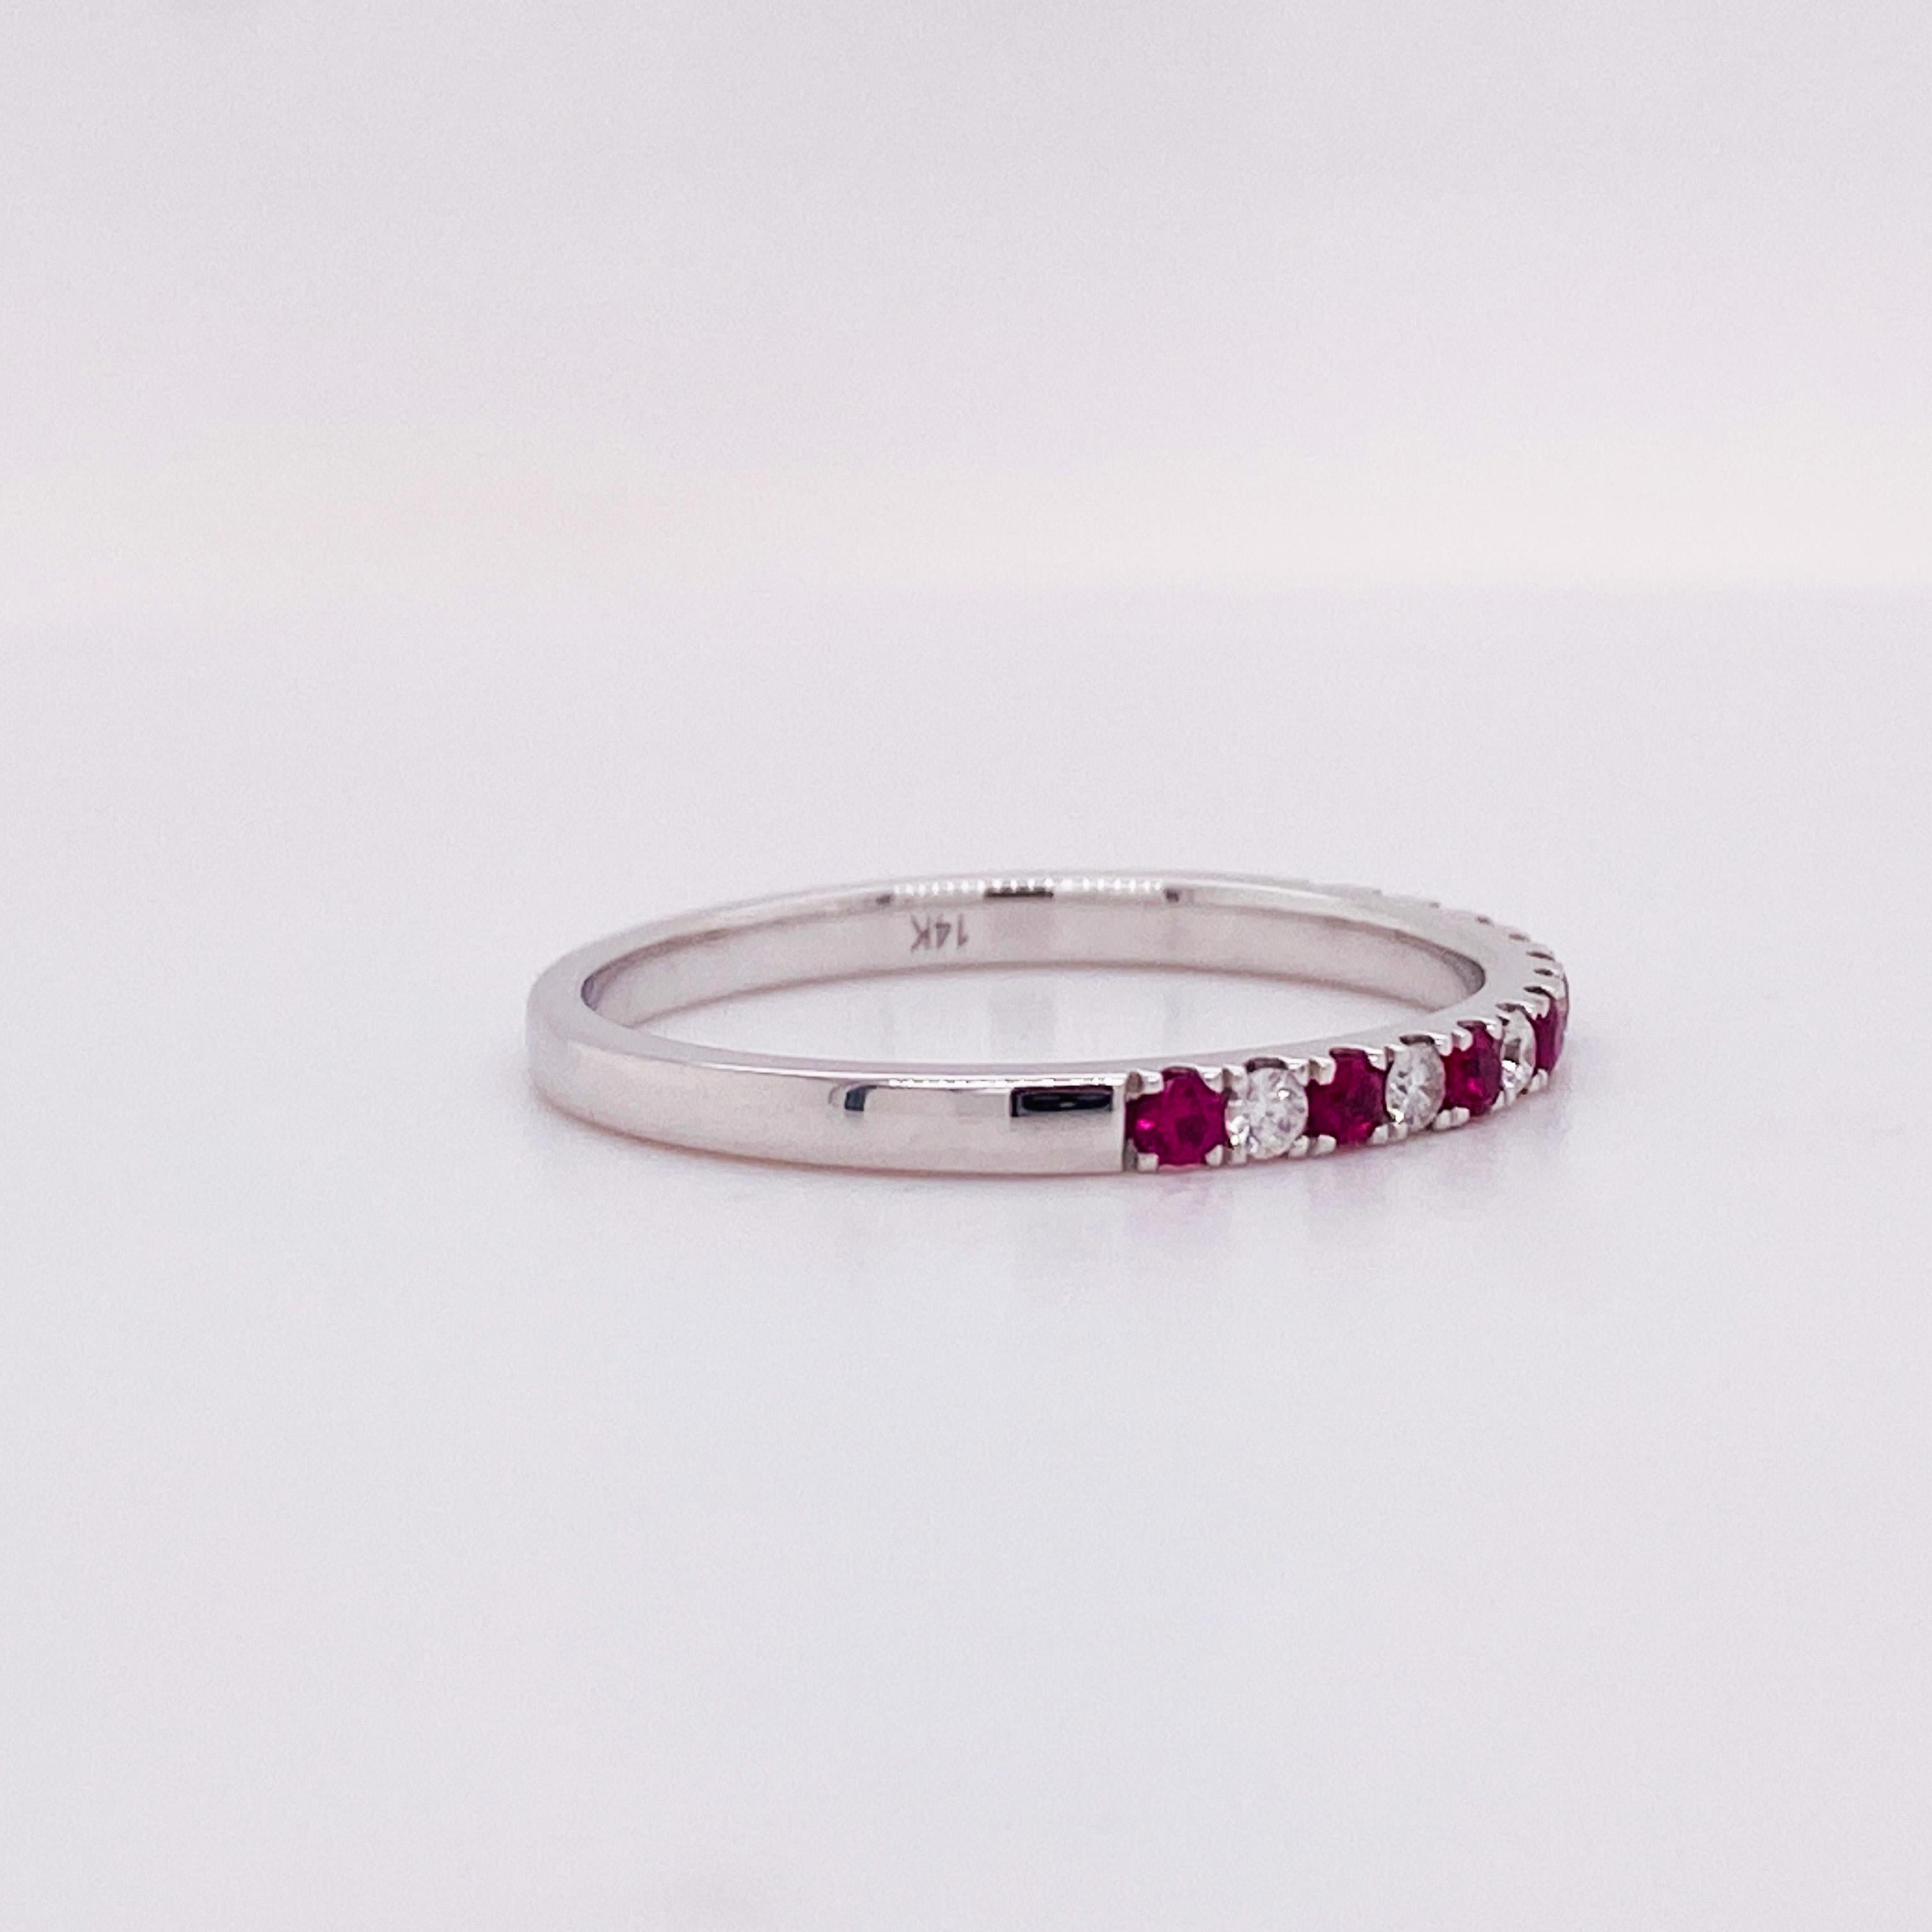 This amazing ruby and diamond ring is the perfect pop of red and white! The ring is handmade in 14 karat white gold which is stronger than yellow gold. There are 14 diamonds and ruby gemstones in the ring that are all natural. This handmade ring